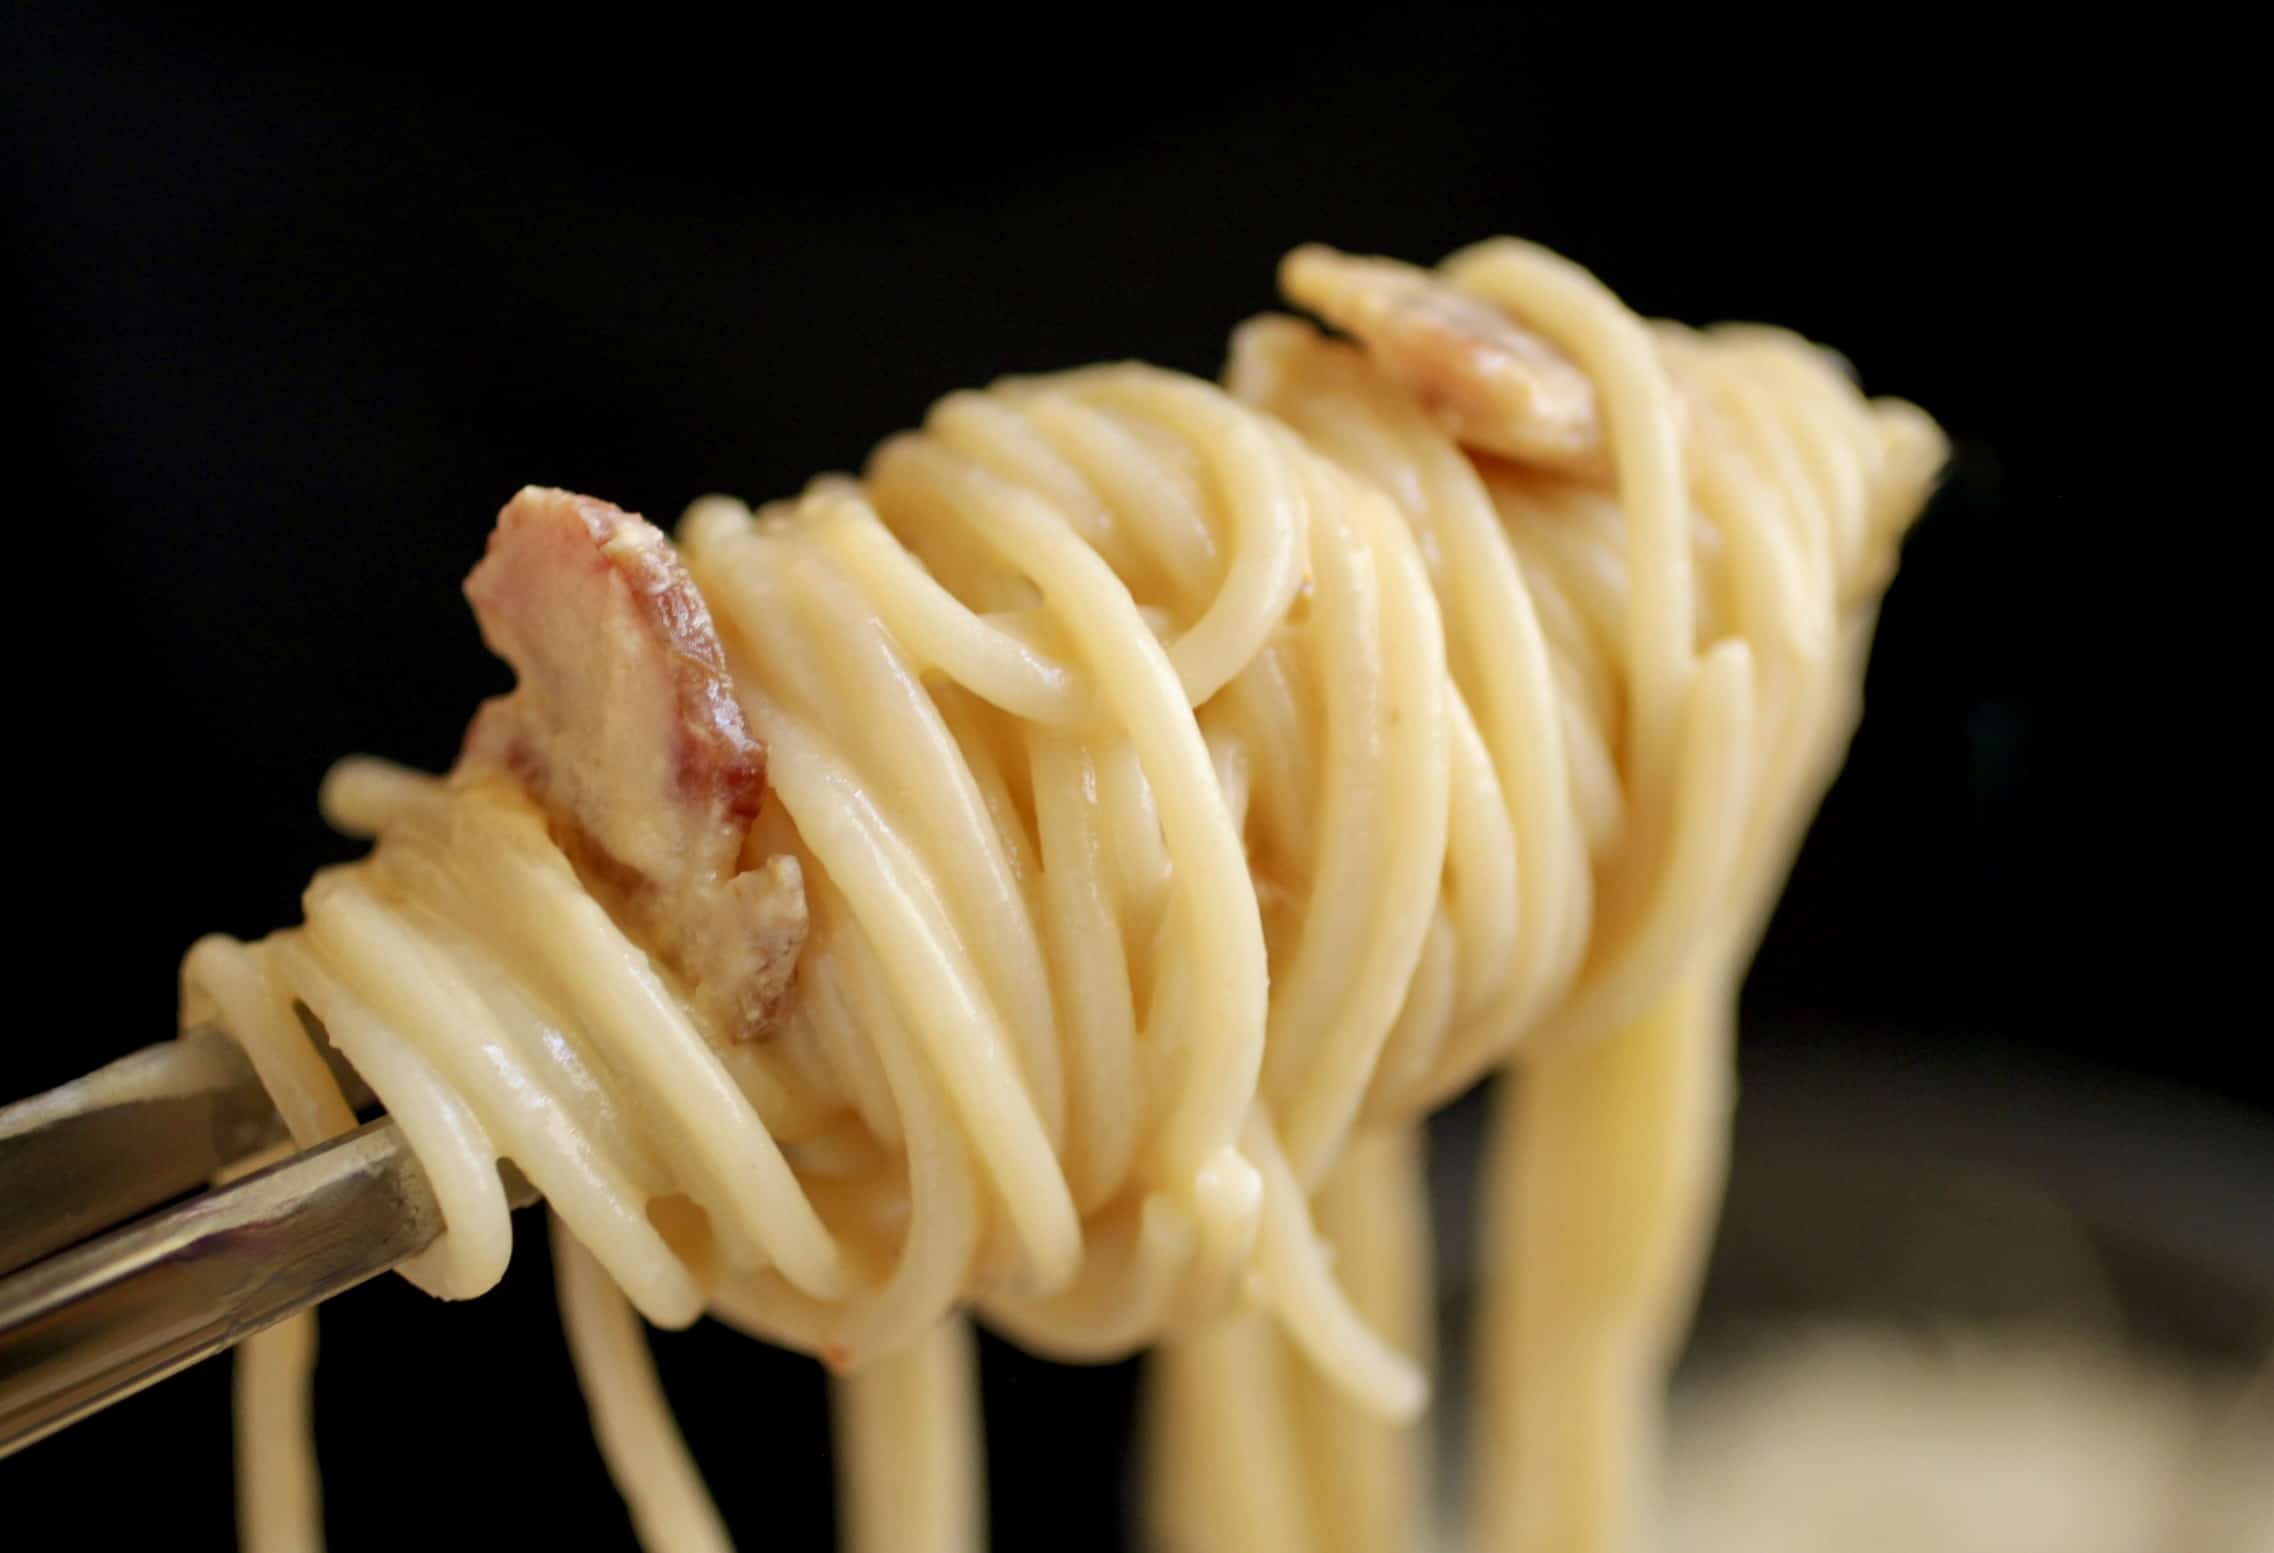 How to Make Pasta Noodles with THIS Foolproof Recipe